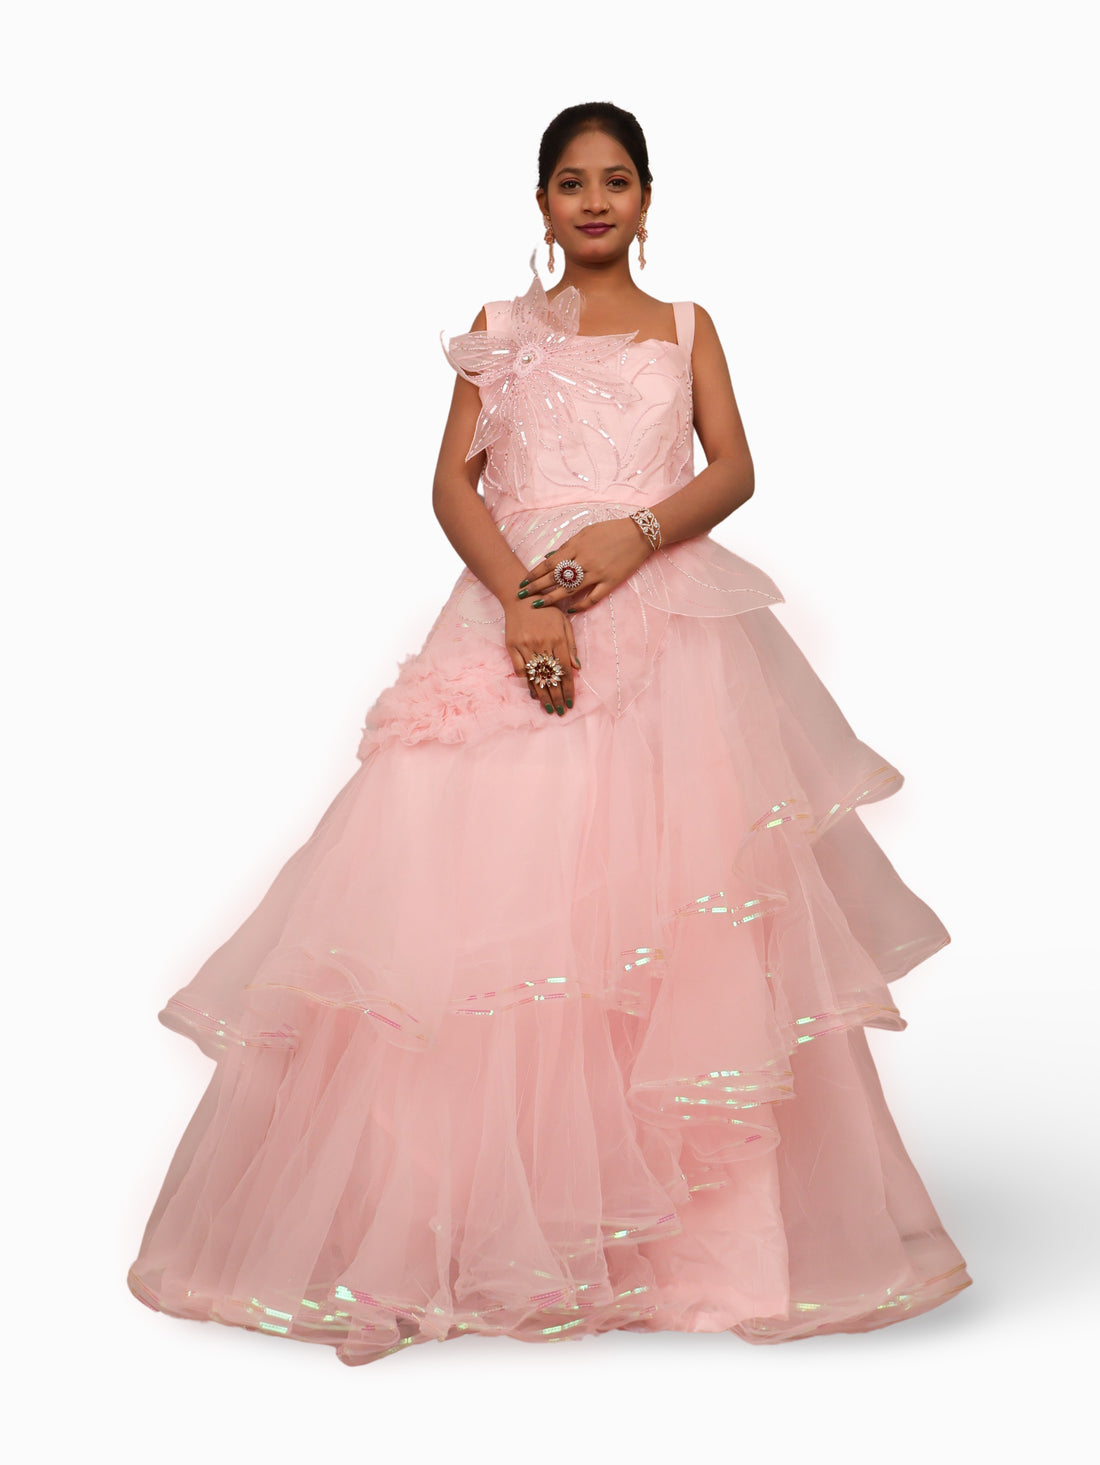 Gown with Beads &amp; Sequin by Shreekama Pink Designer Gowns for Party Festival Wedding Occasion in Noida